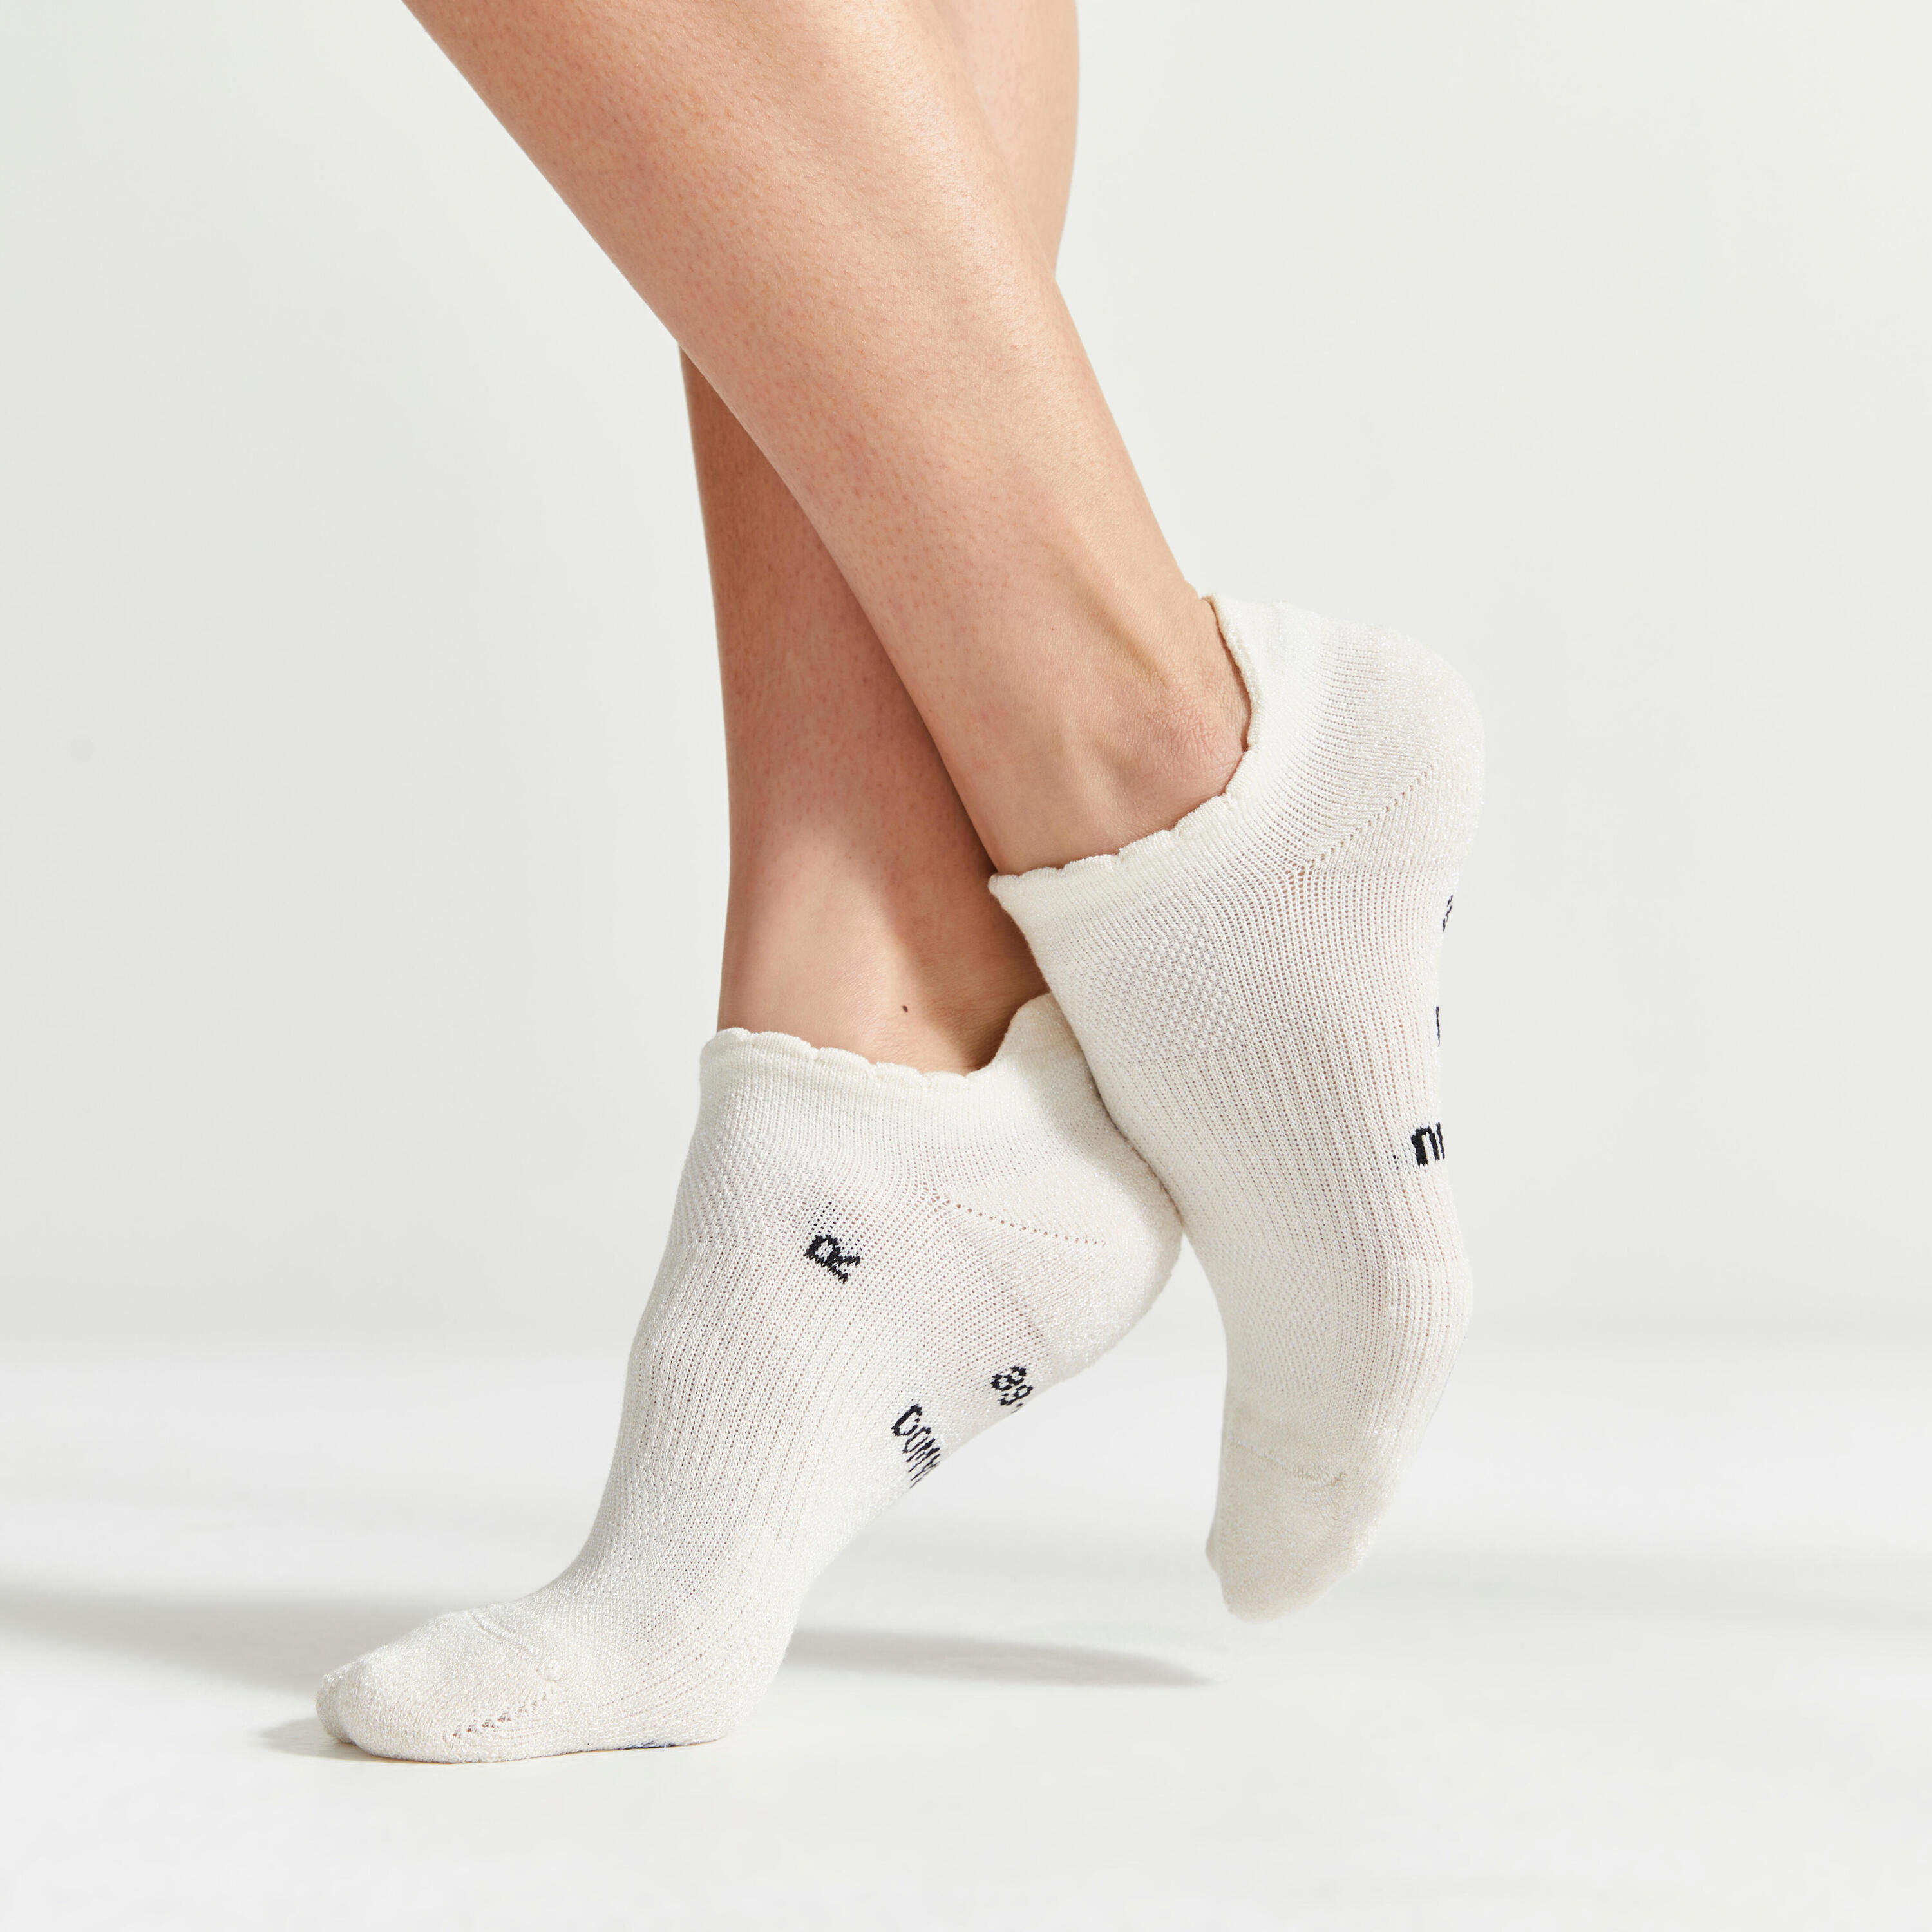 Invisible Fitness Socks - Sparkly 4/10